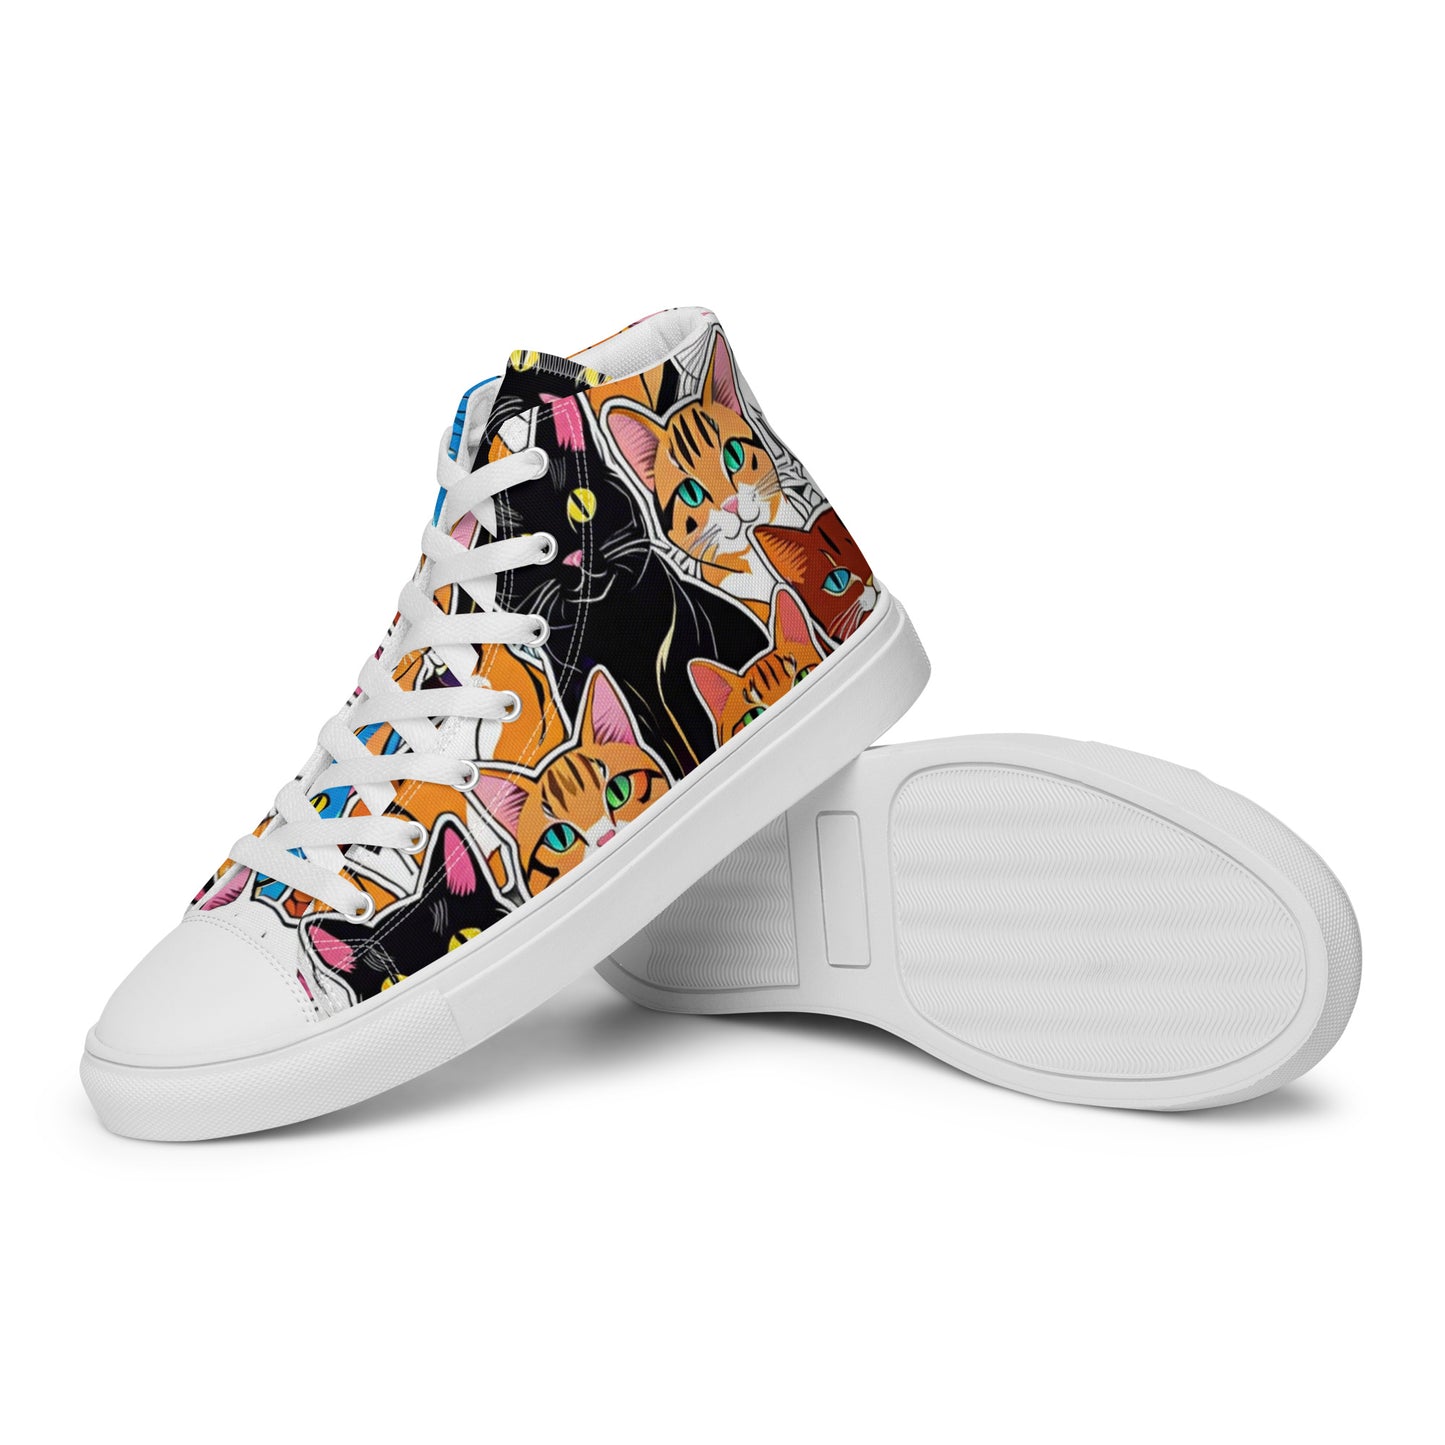 Cats Women’s High Top Canvas Shoes